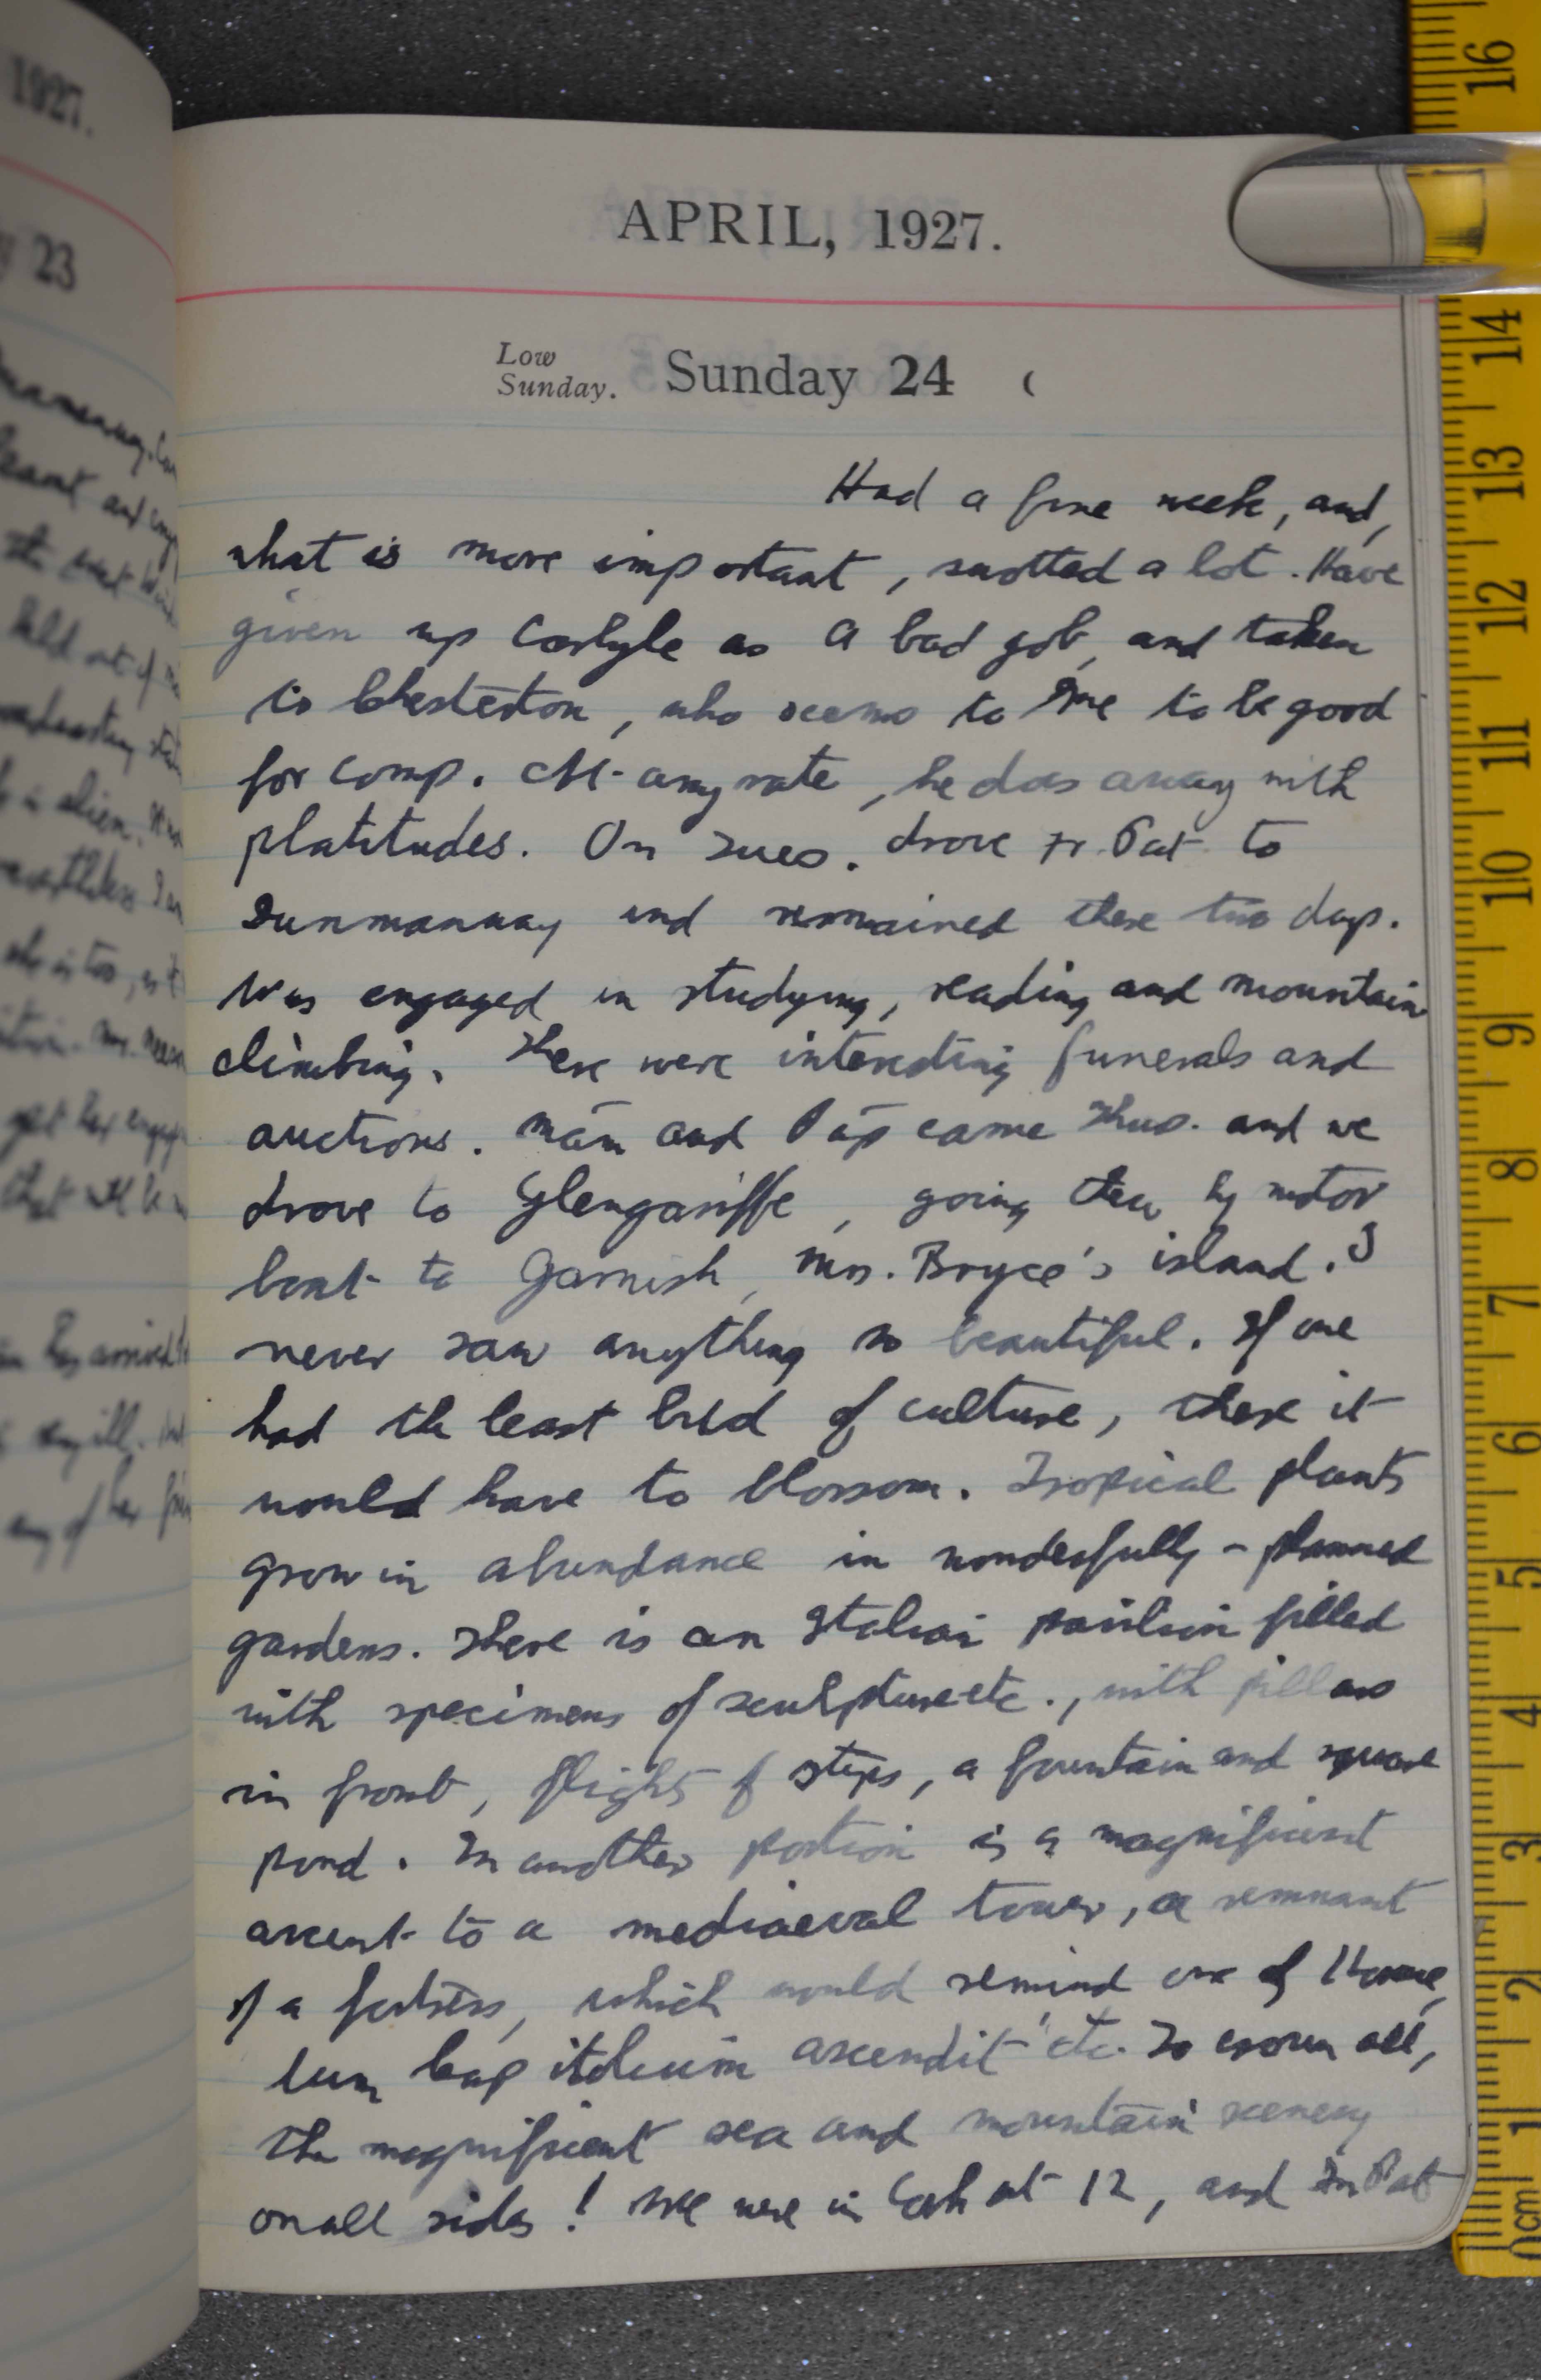 Photograph of one of the diary pages from Sunday April 24, 1927